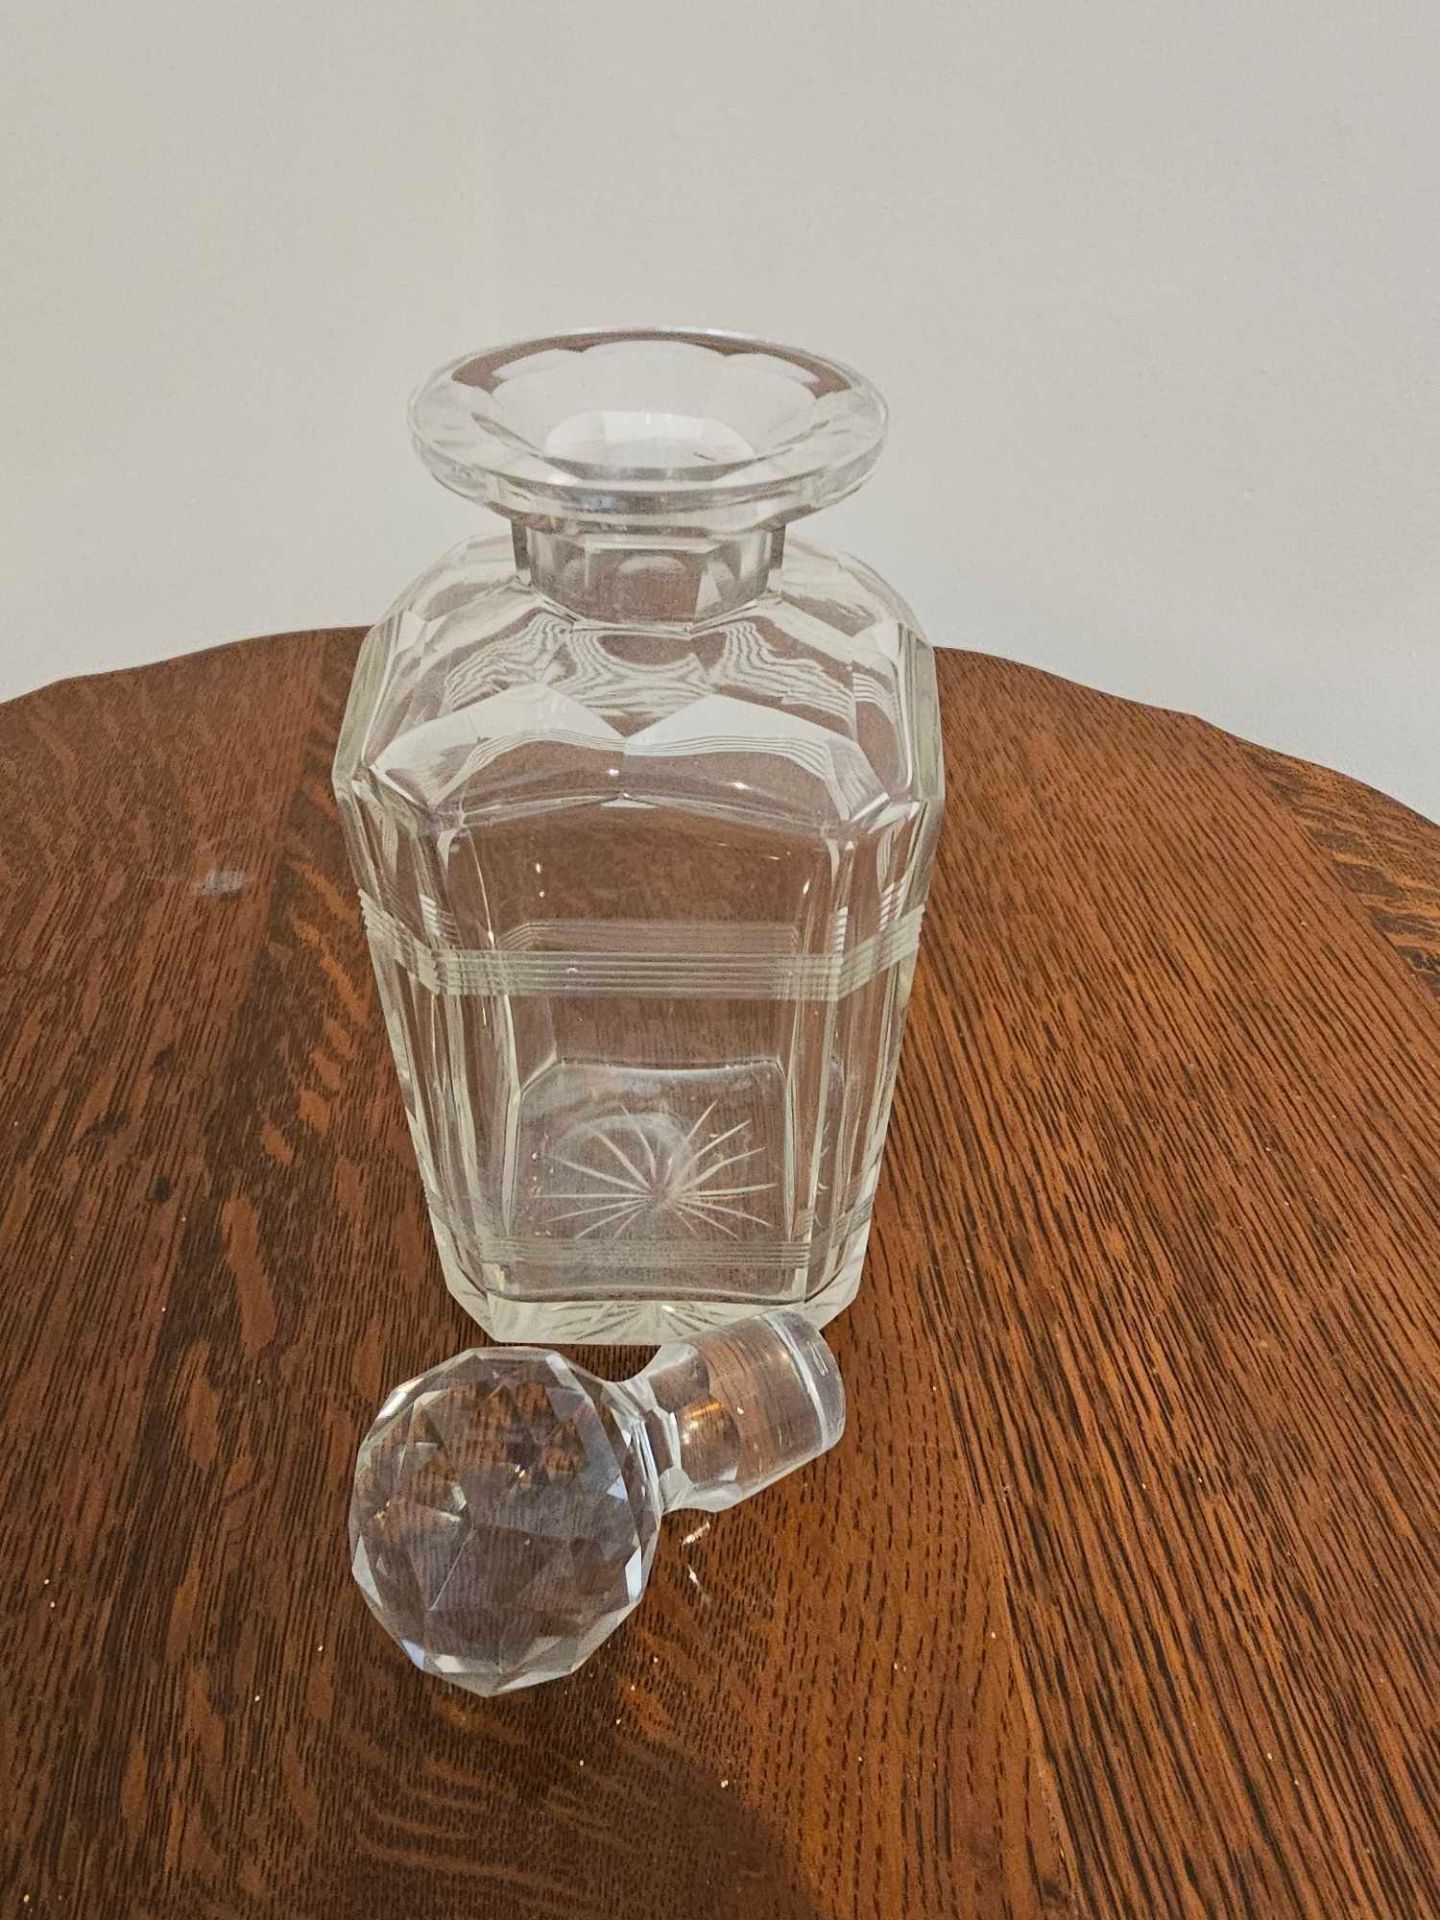 Royal Scot Crystal A Square Cut Spirit Decanter With Stopper 22cm - Image 4 of 5